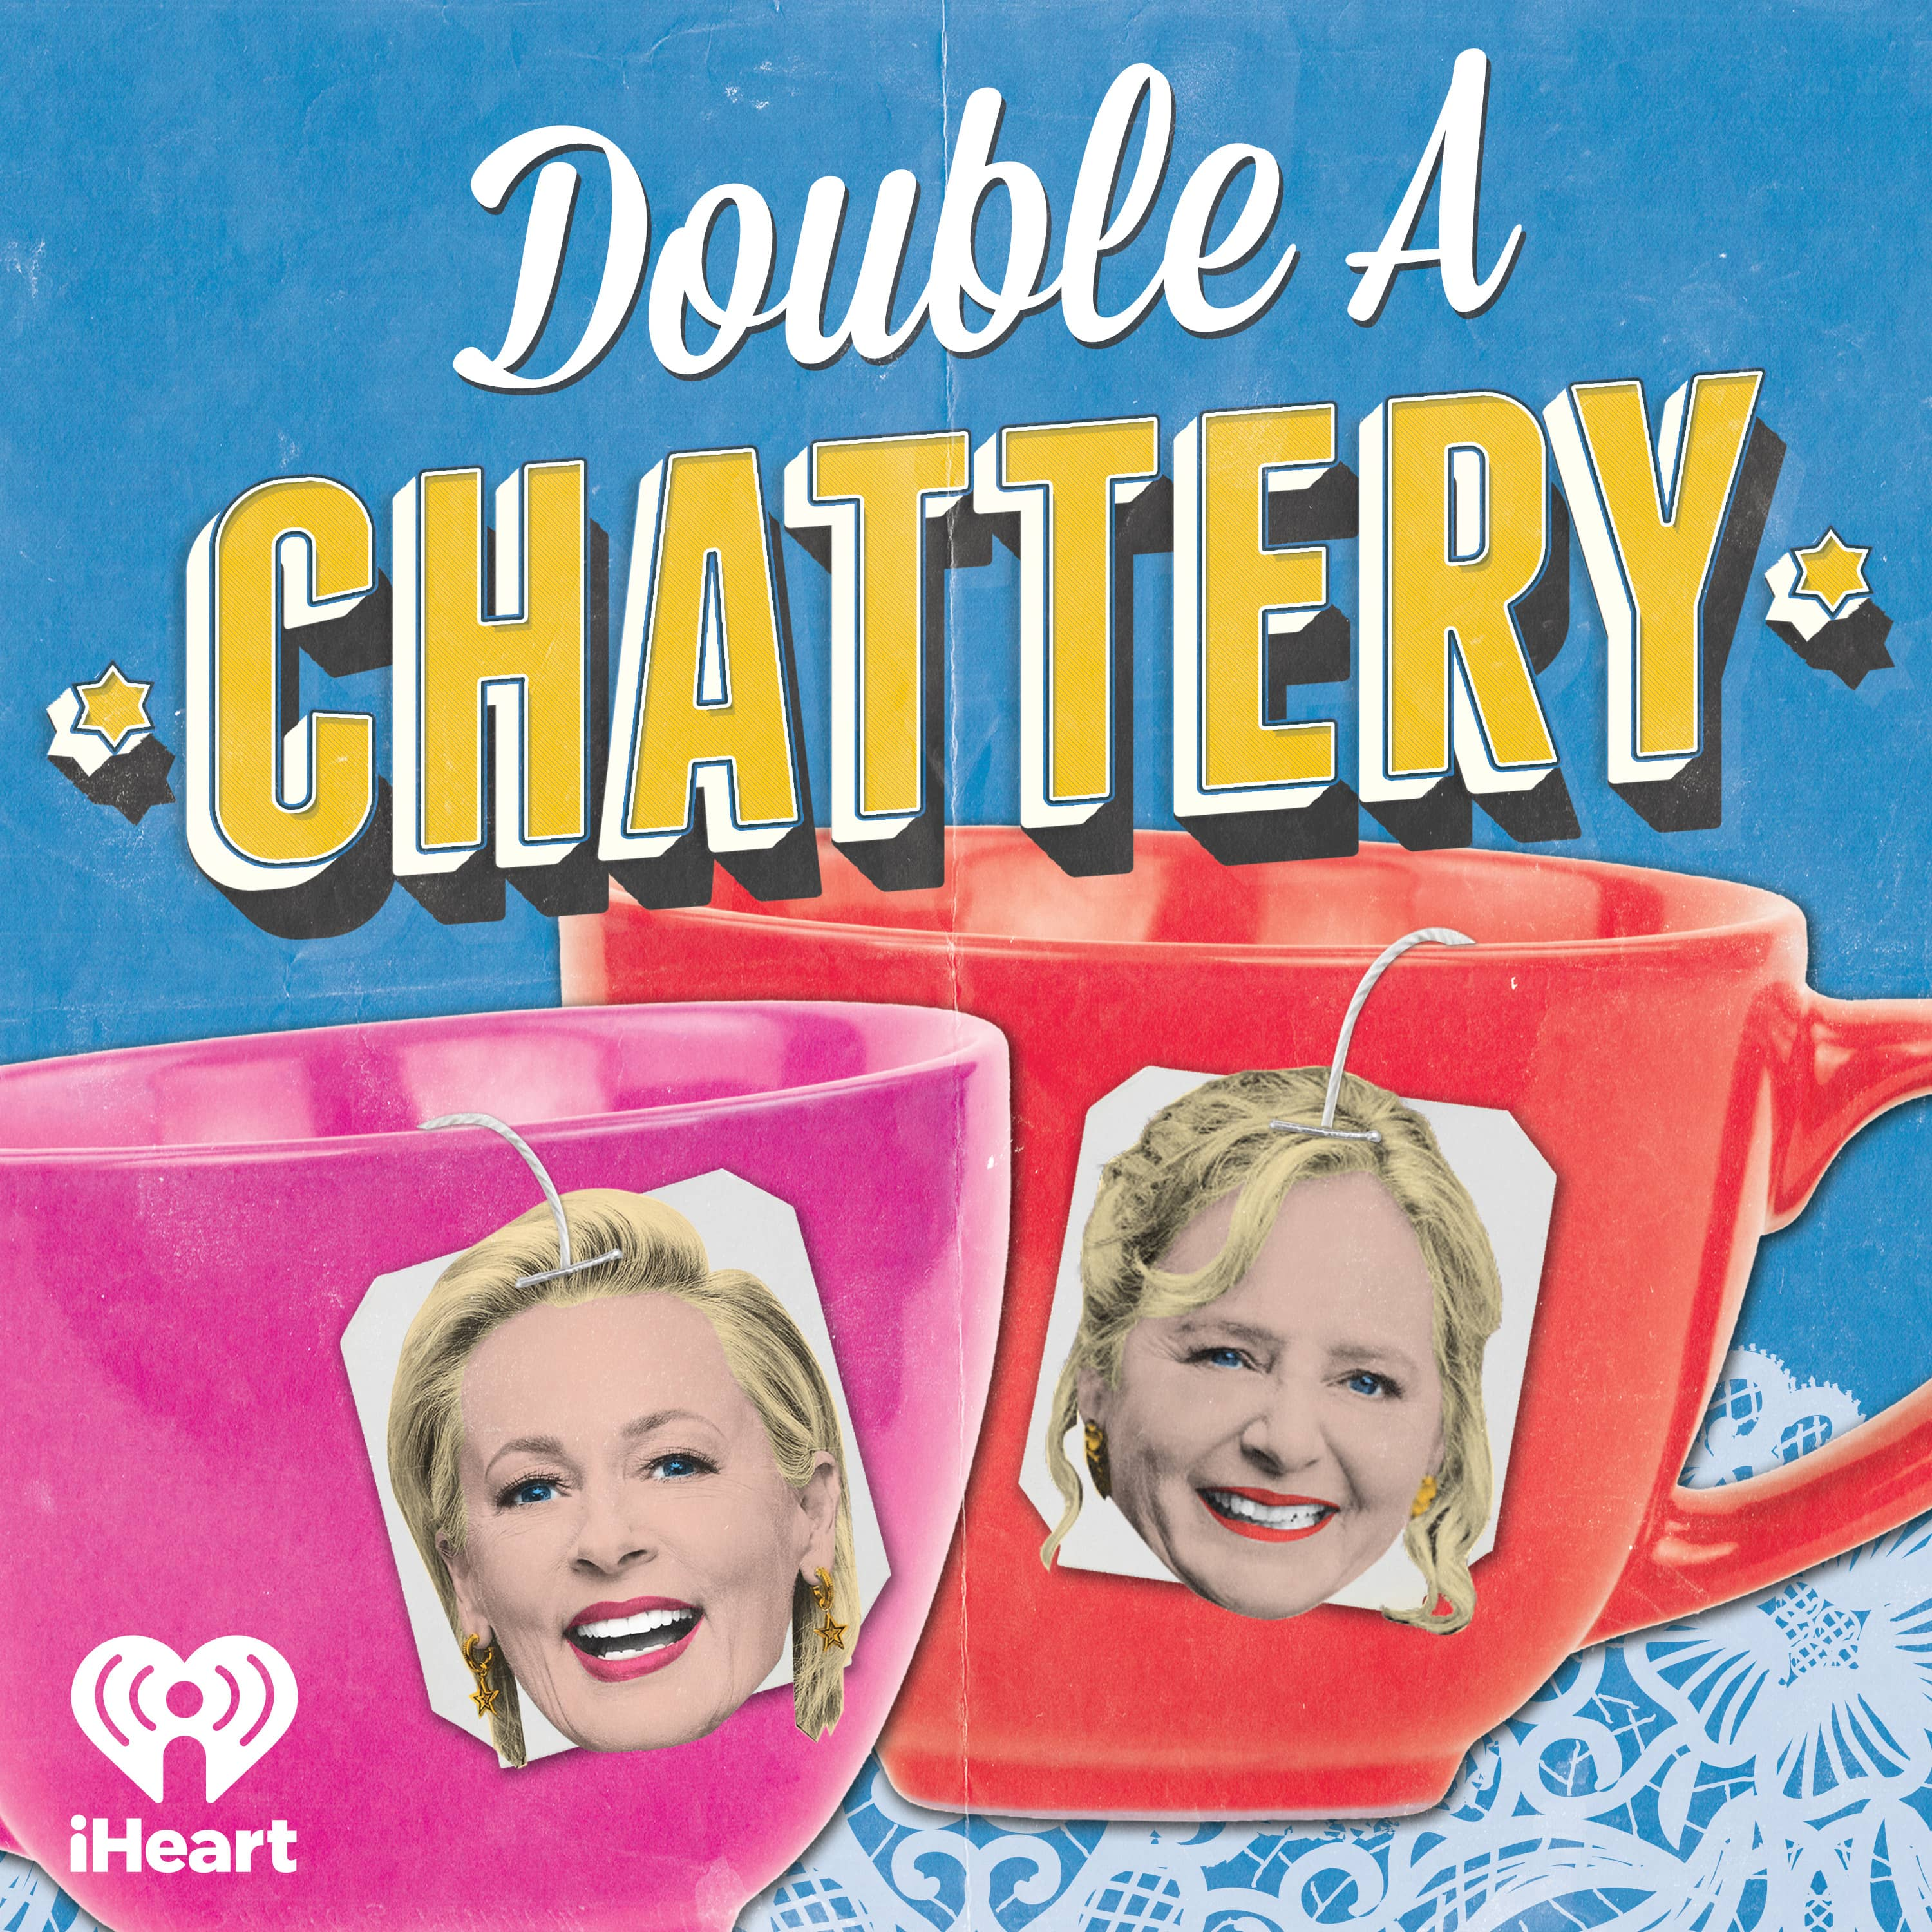 Introducing… Double A Chattery!